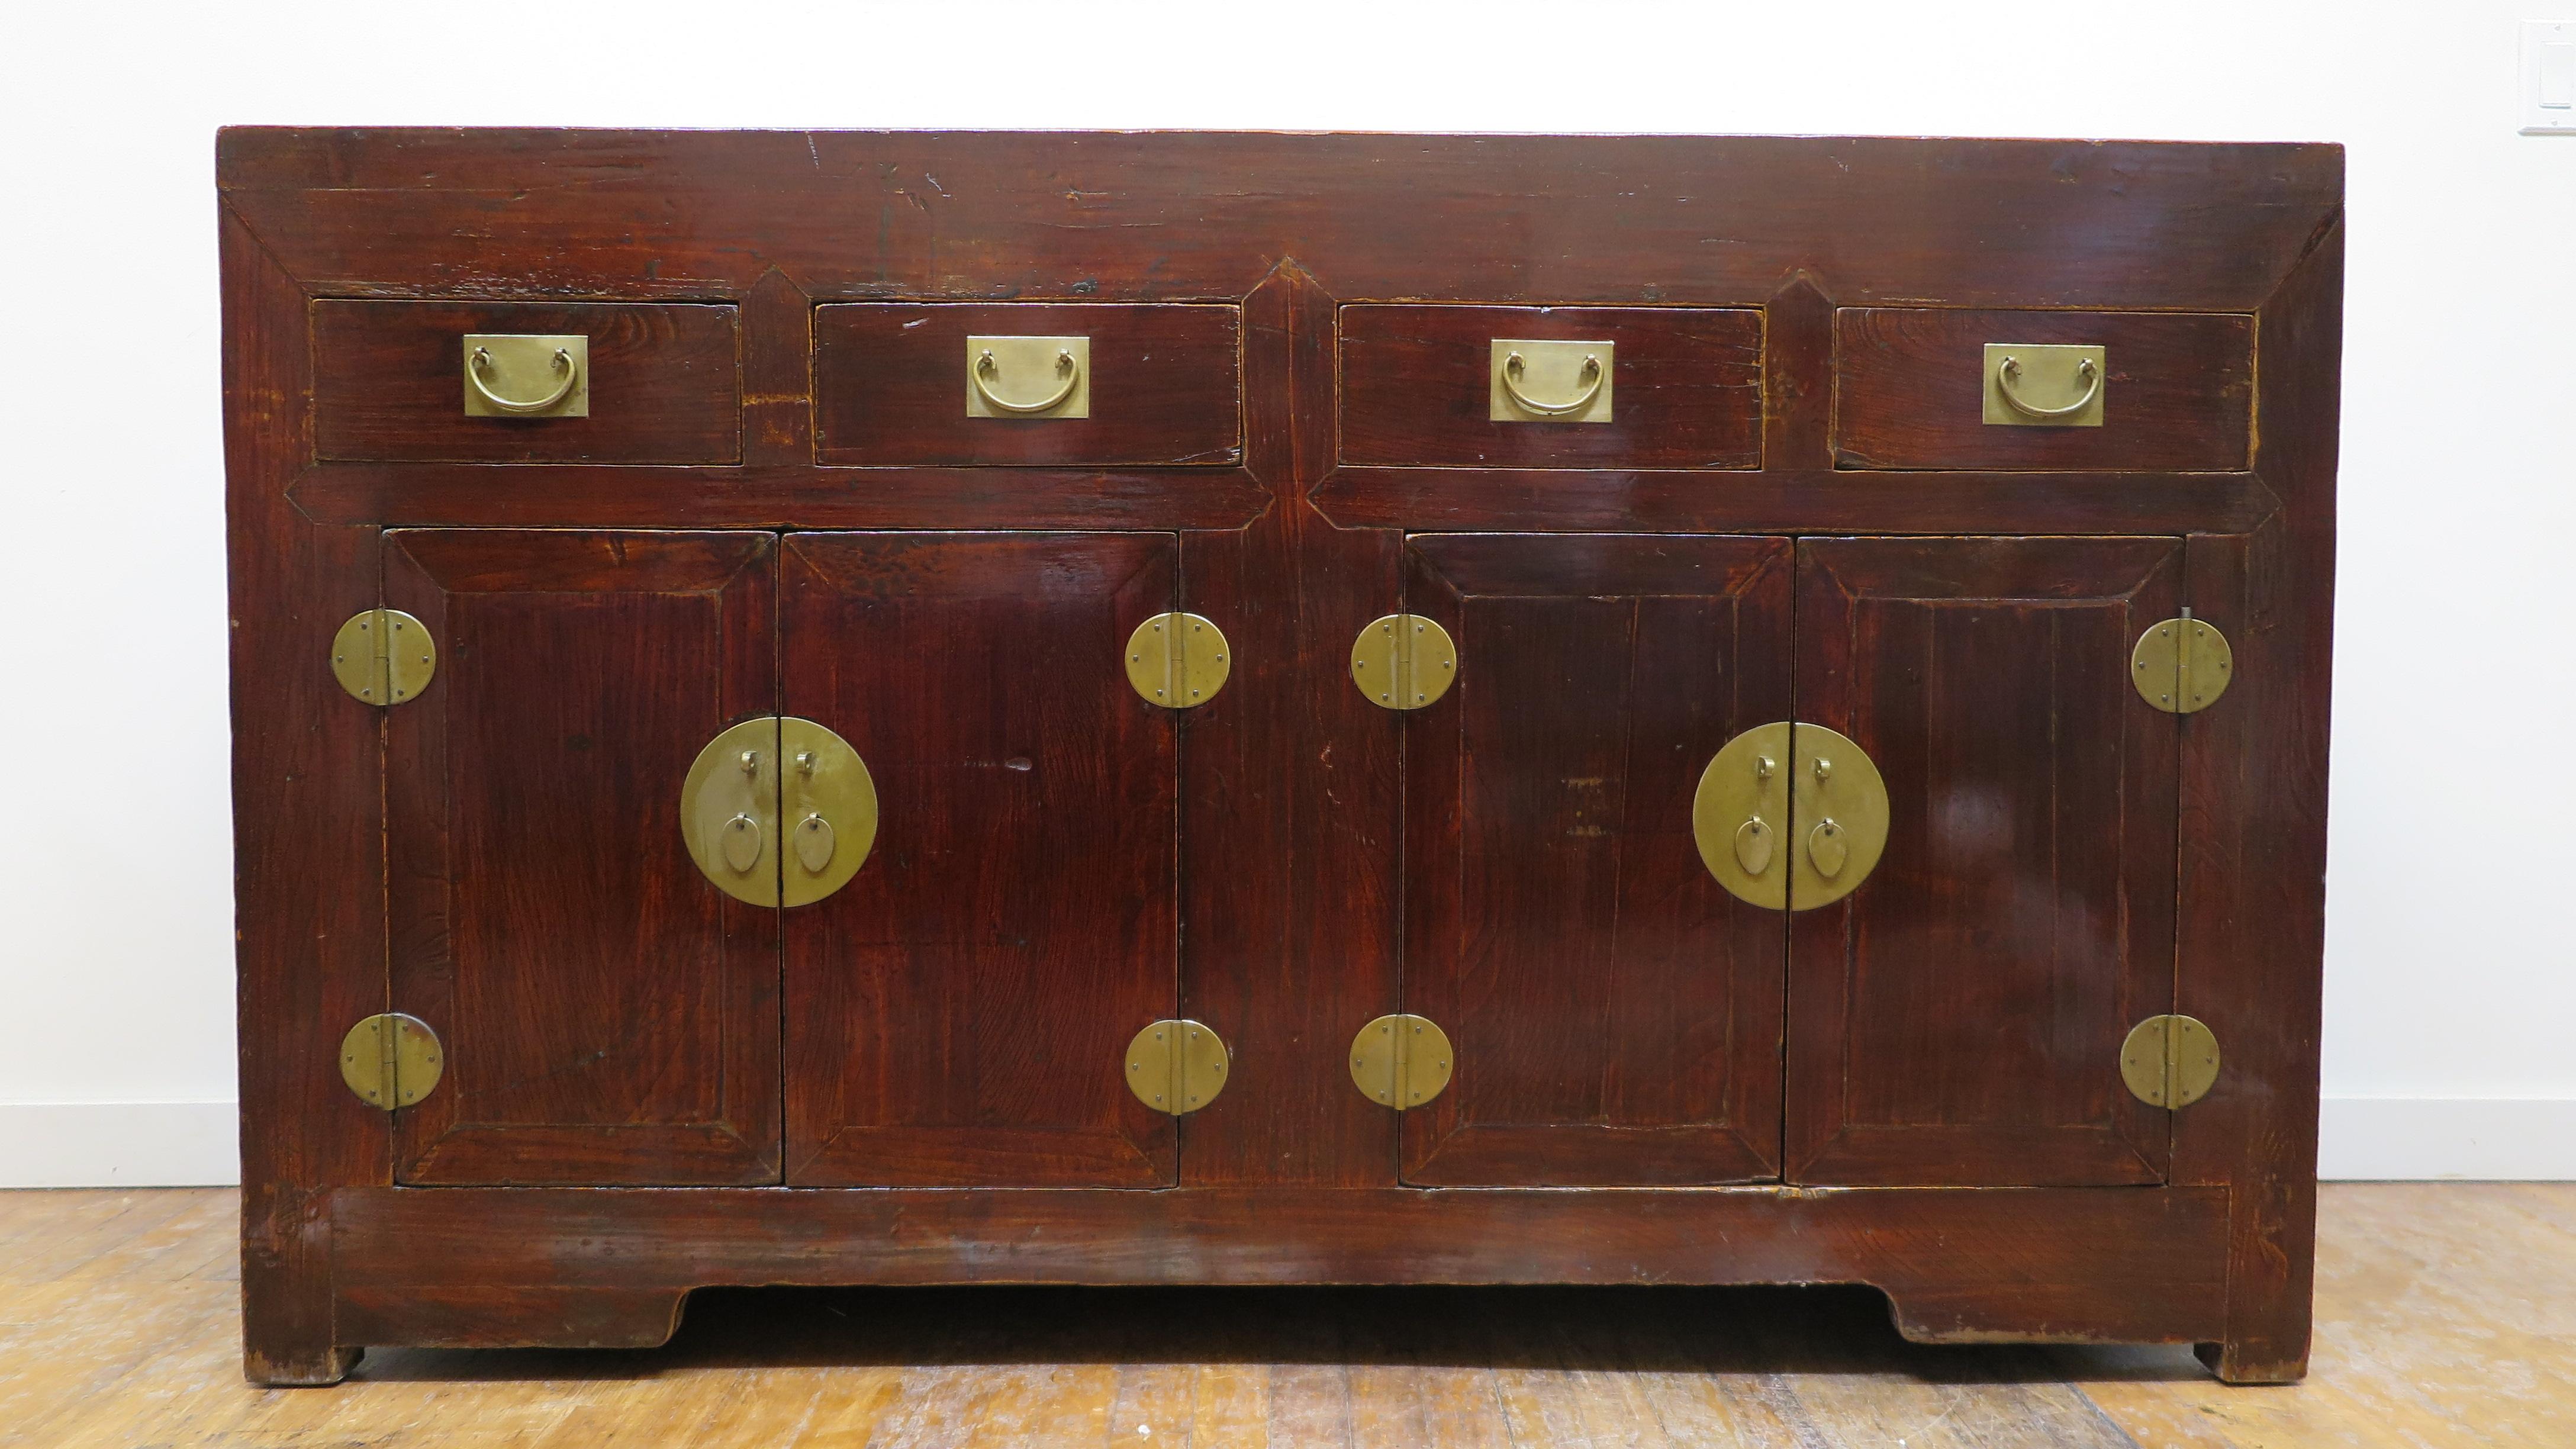 Chinese 19th century Rustic sideboard. Timeless design clean lines and lots of usable storage. Elmwood sideboard having plum lacquer, four upper drawers with two lower cabinets. Strong and solid this sideboard offers functional and practical use